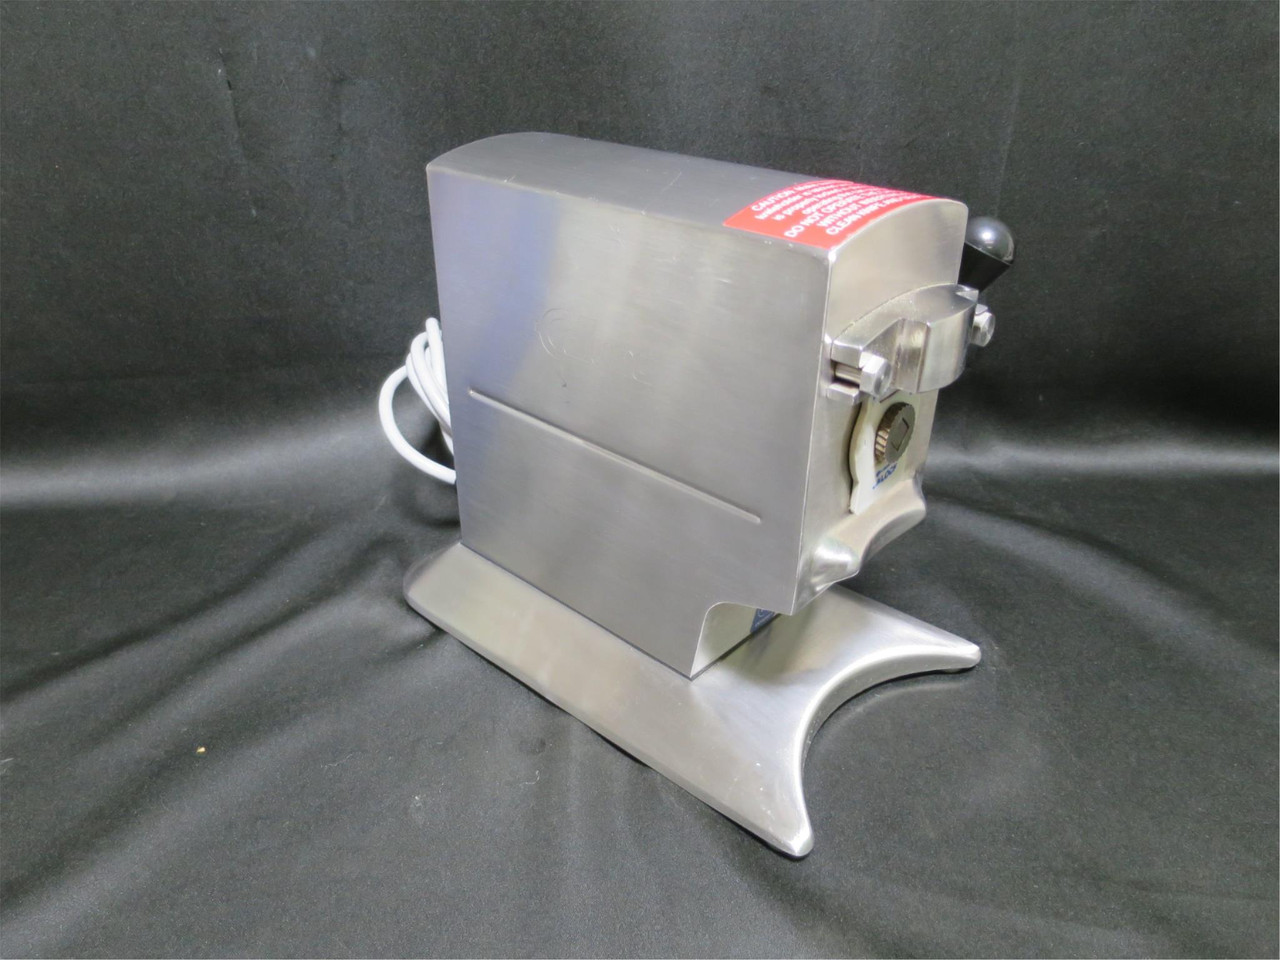 Edlund 270 Series 2 Electric Commercial 2-Speed Automatic Can Opener